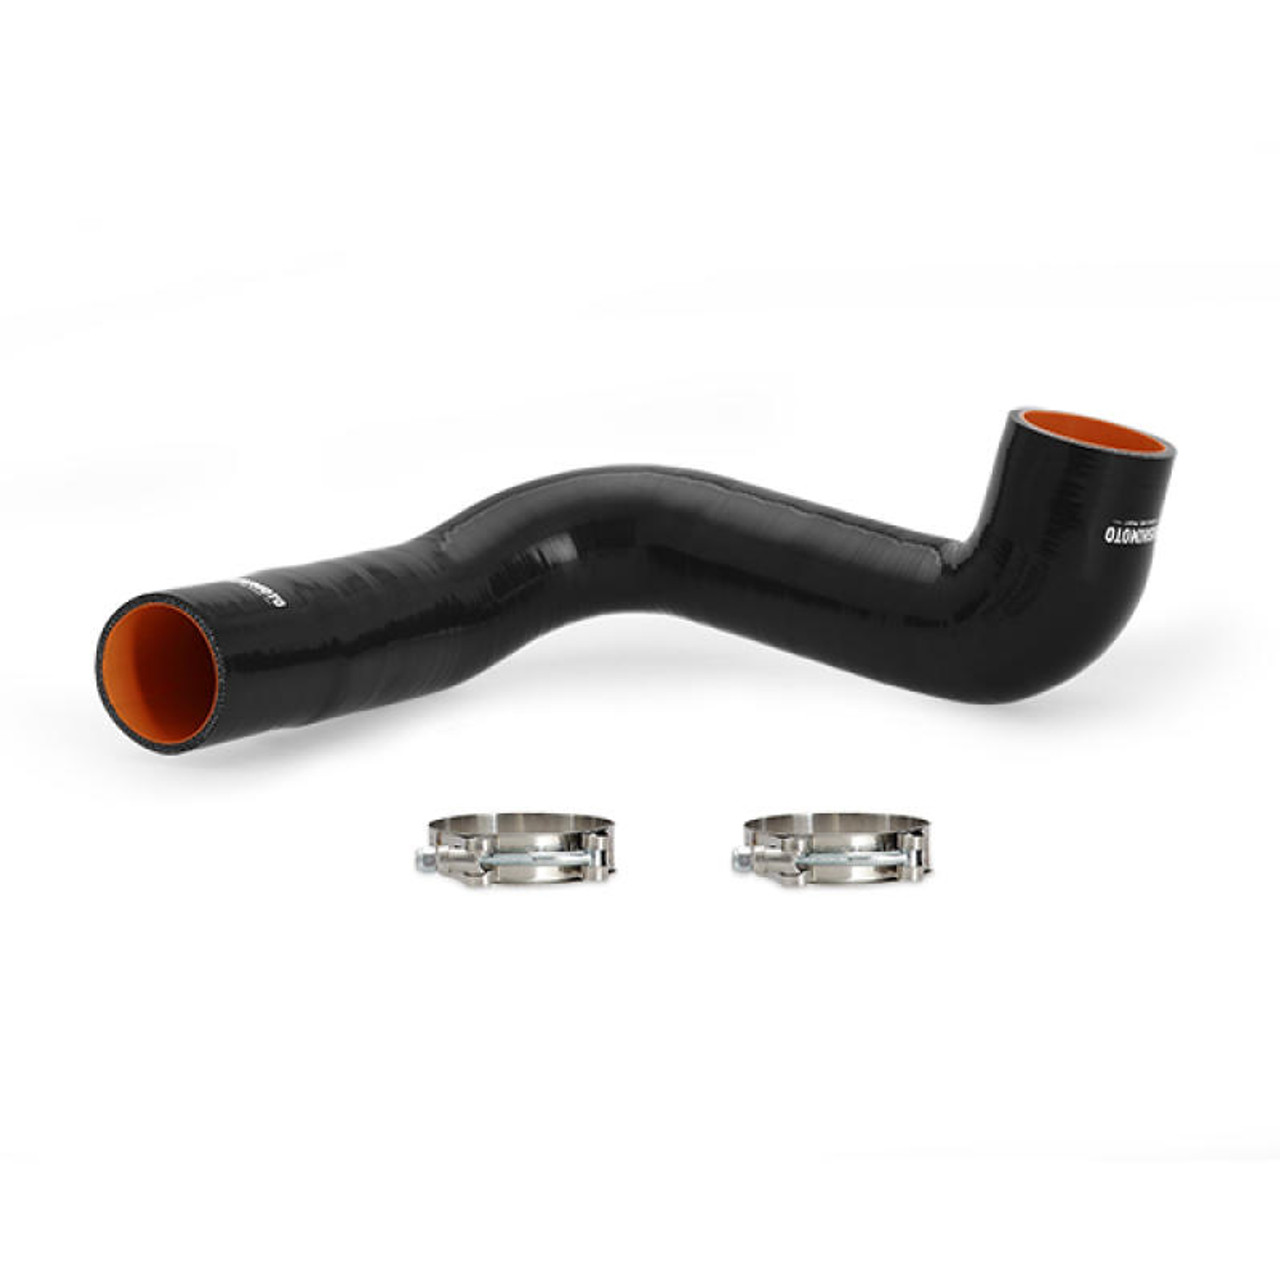 Mishimoto 2016 Ford Focus RS Cold Side Intercooler Pipe - Black - MMICP-RS-16CBK